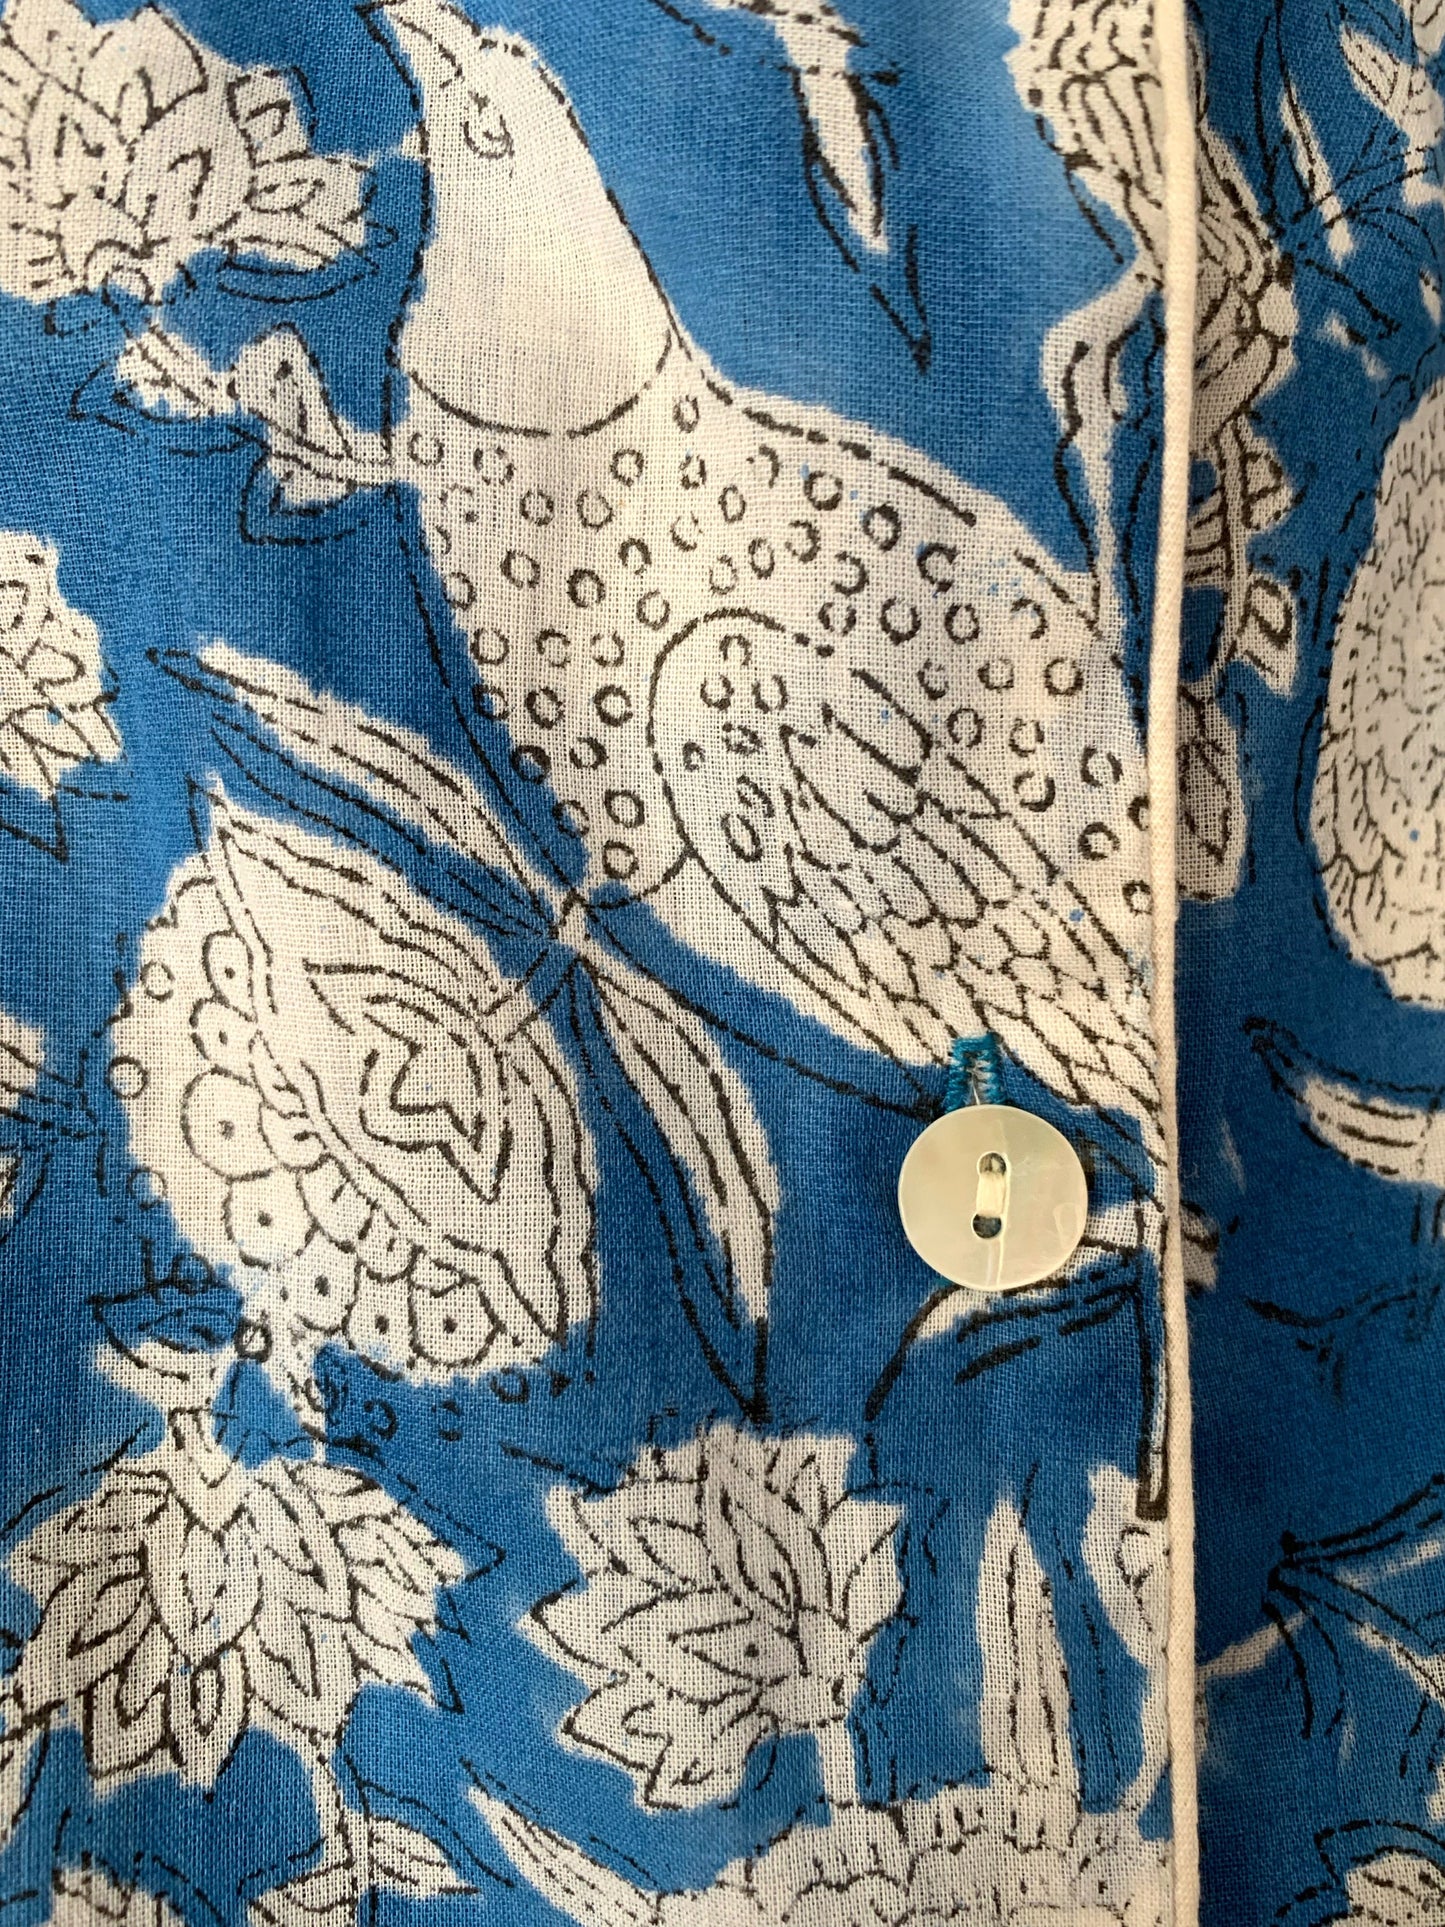 Nightgown · Pure cotton block print handmade in India · 100% cotton sleep shirt · Long-sleeved cotton nightgown · Blue